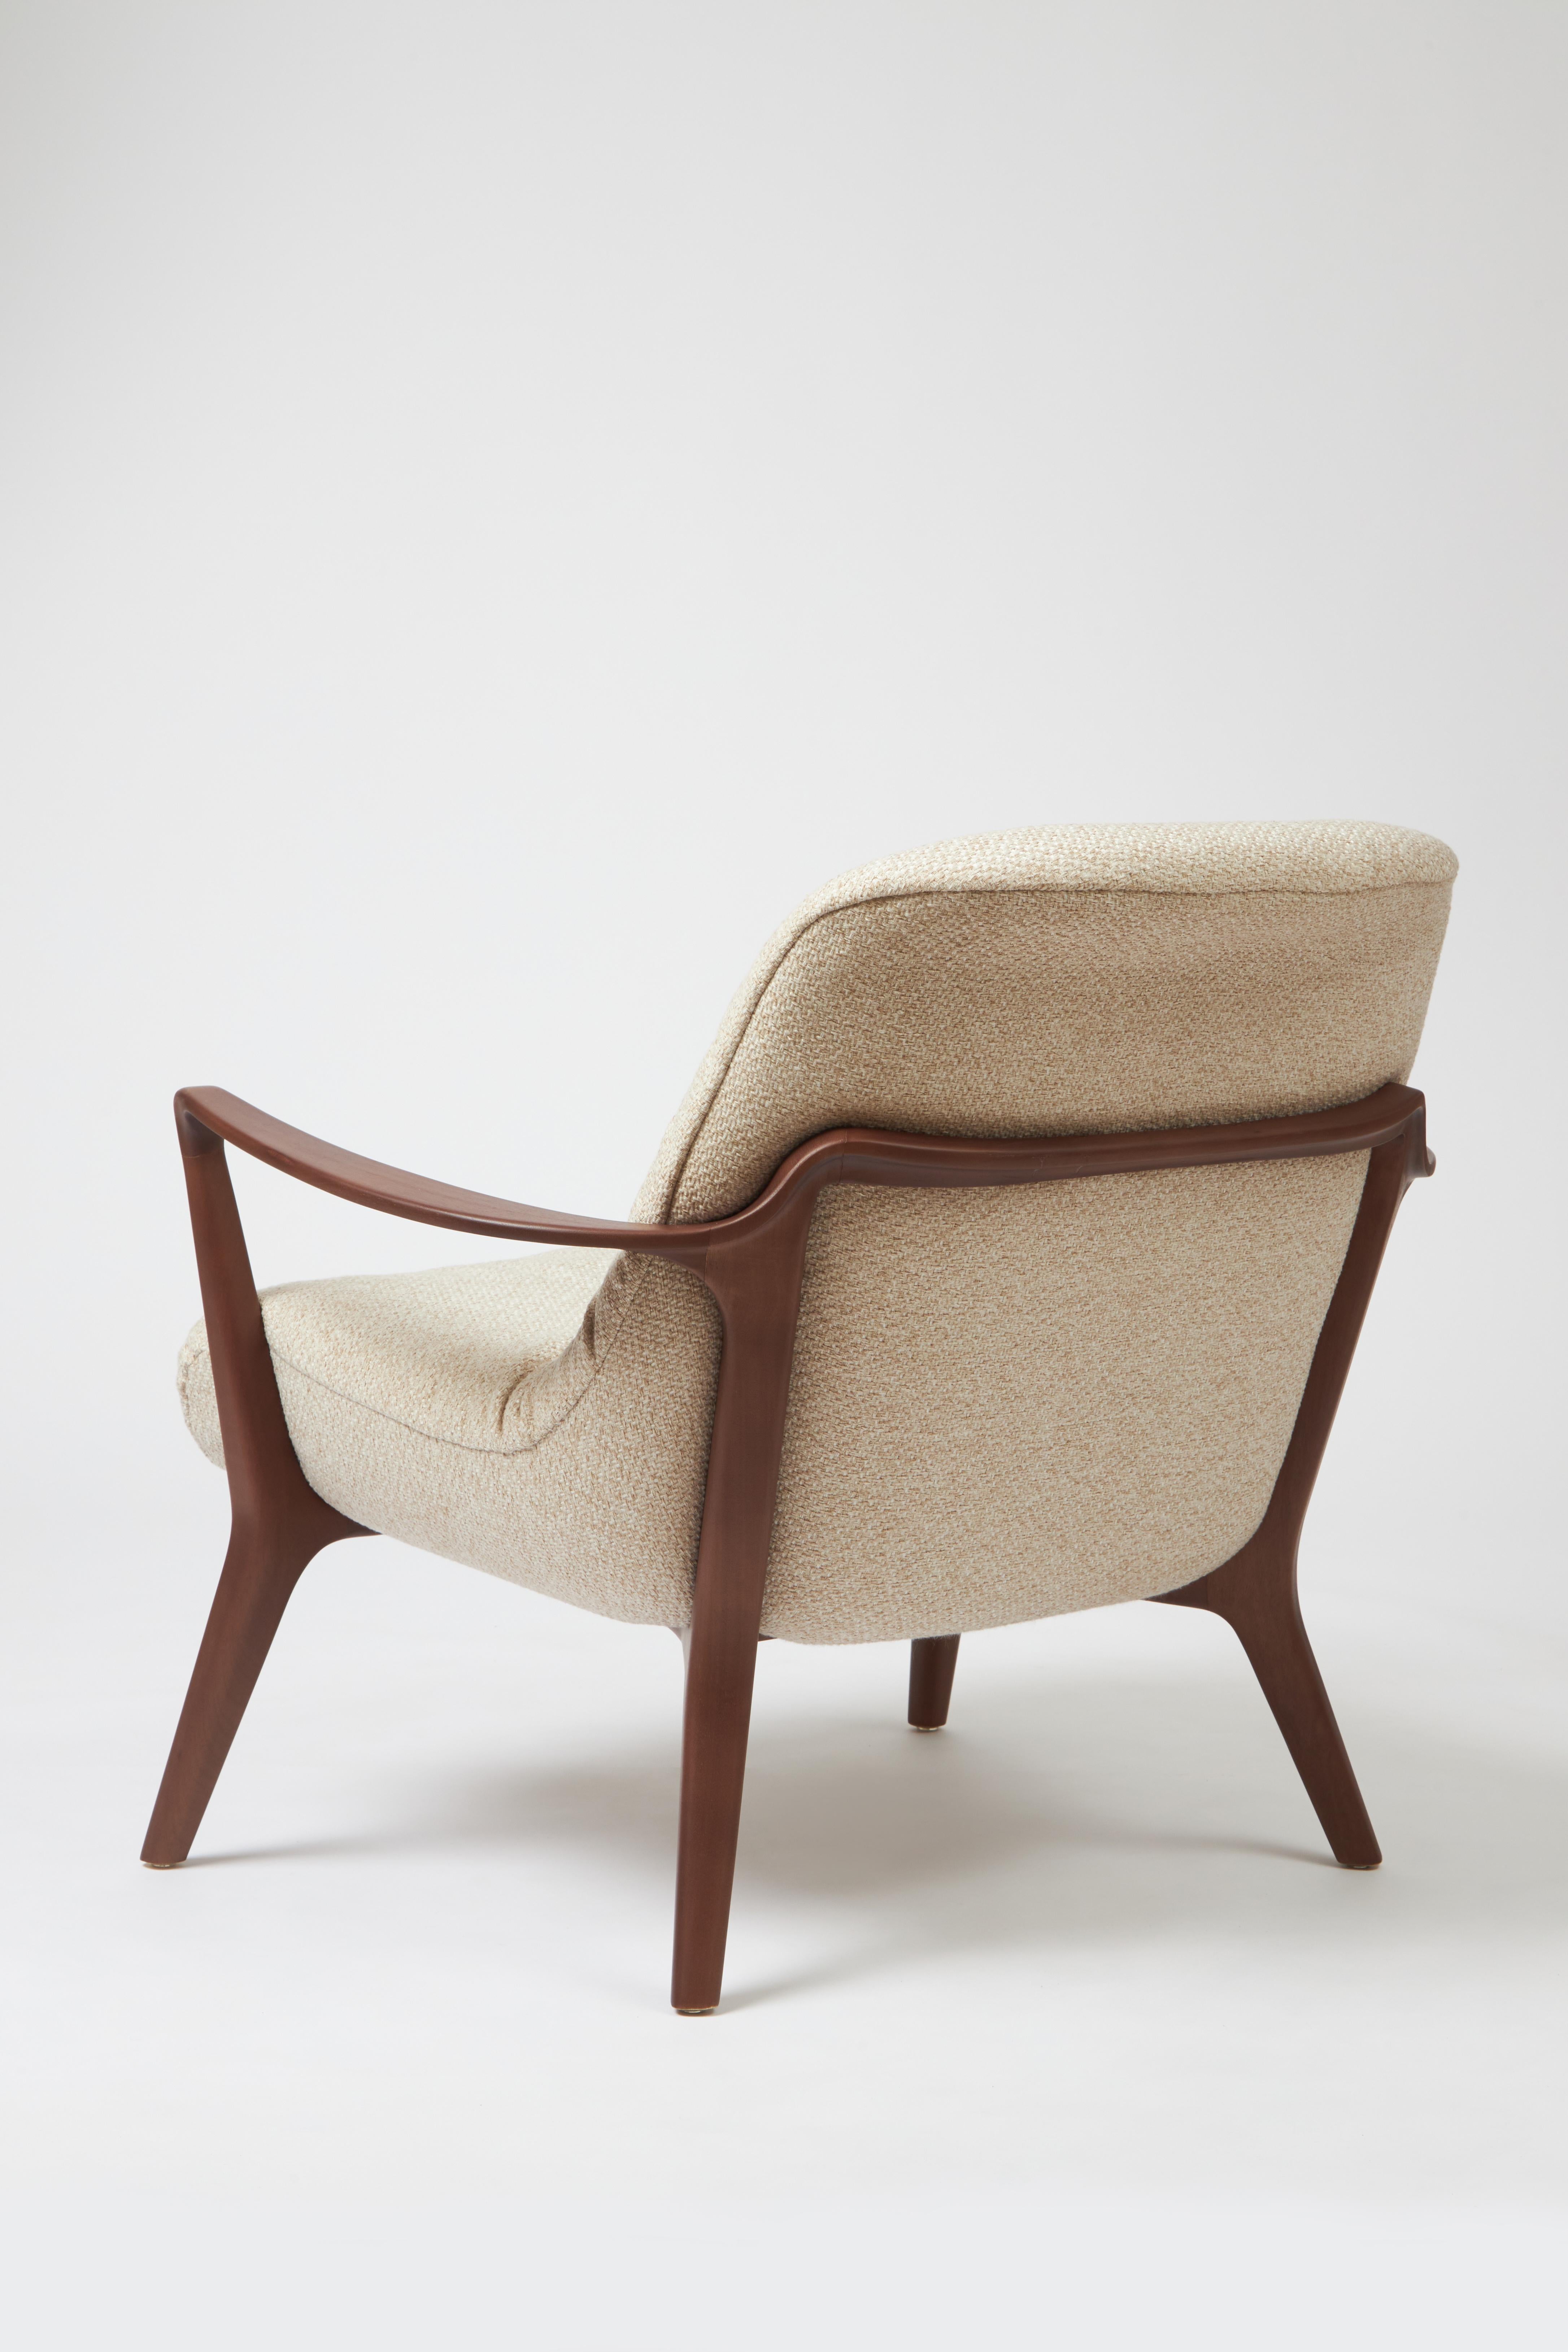 Caning Minimal Style Insigne Armchair Sculpted in walnut wood finish, textiles seating For Sale